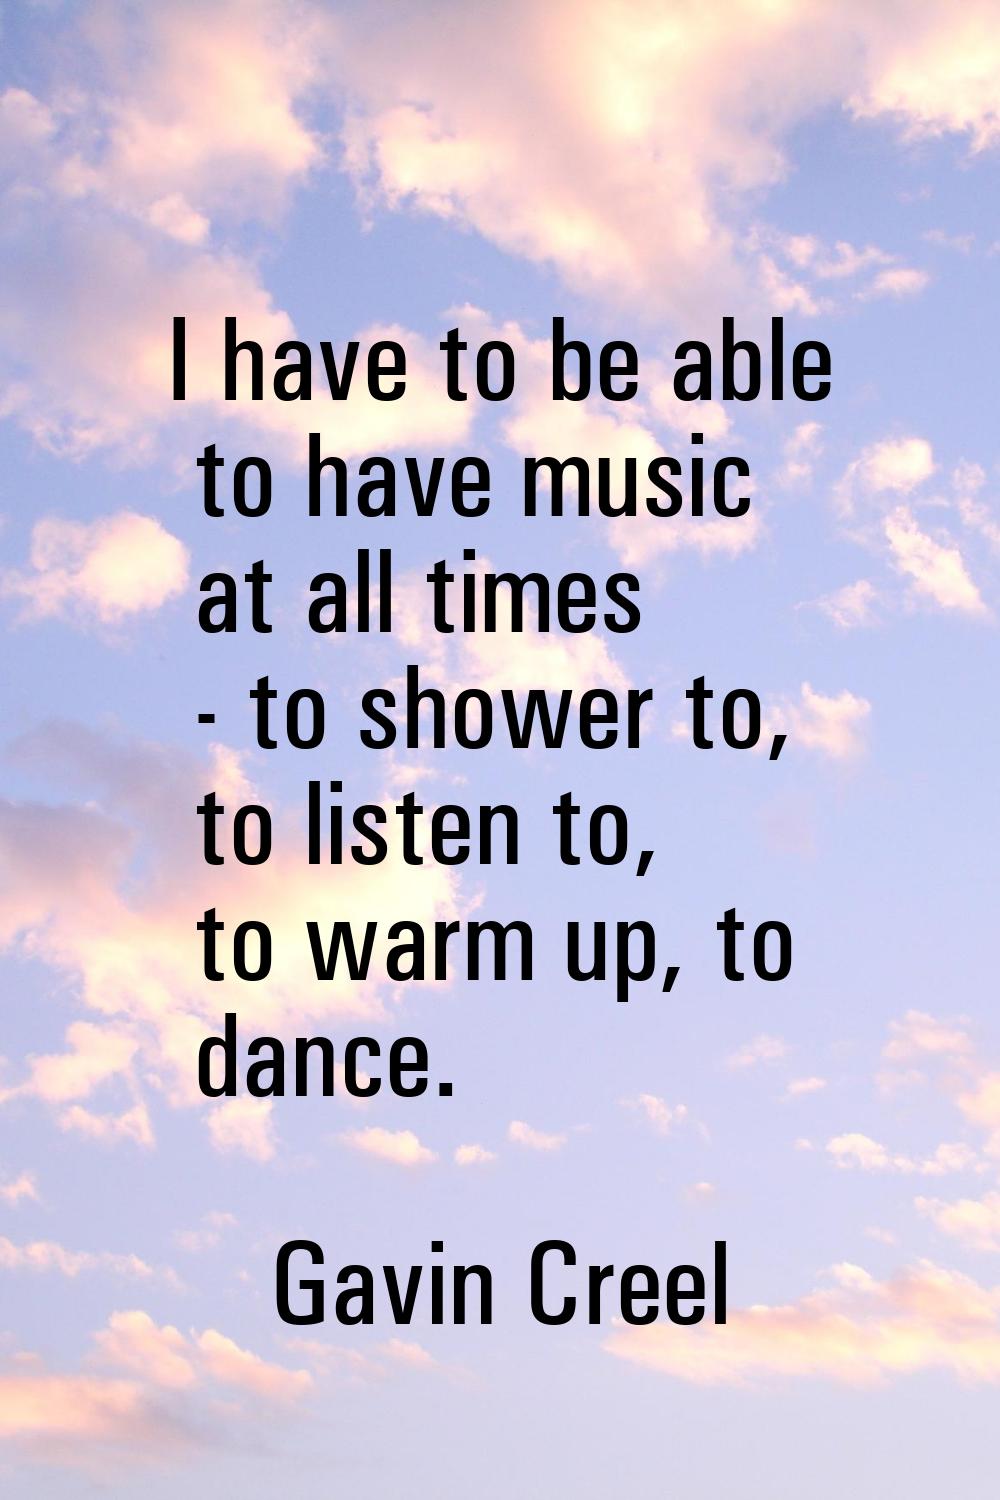 I have to be able to have music at all times - to shower to, to listen to, to warm up, to dance.